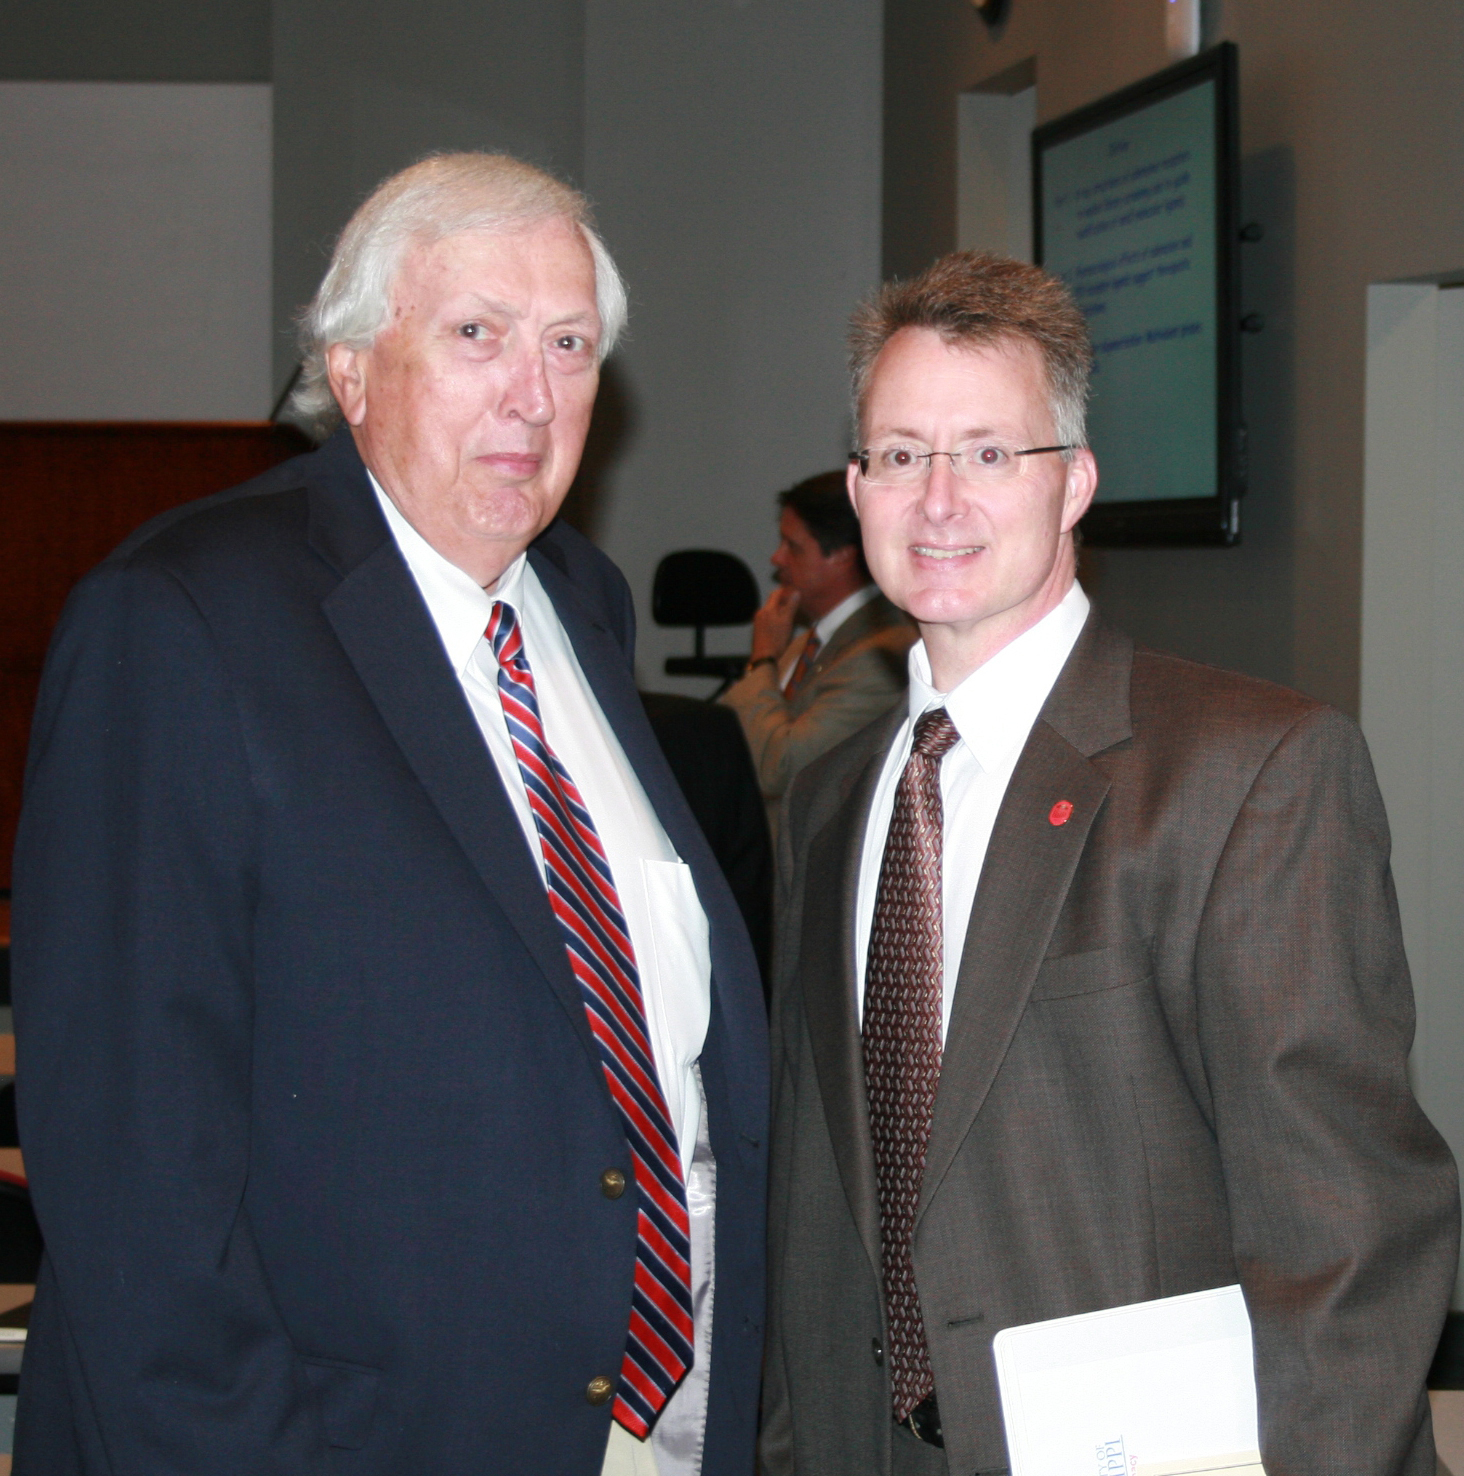 UM pharmacy Dean David D. Allen and Ronald Borne attend the Ronald F. Borne Distinguished Lecture in Medicinal Chemistry in 2008.